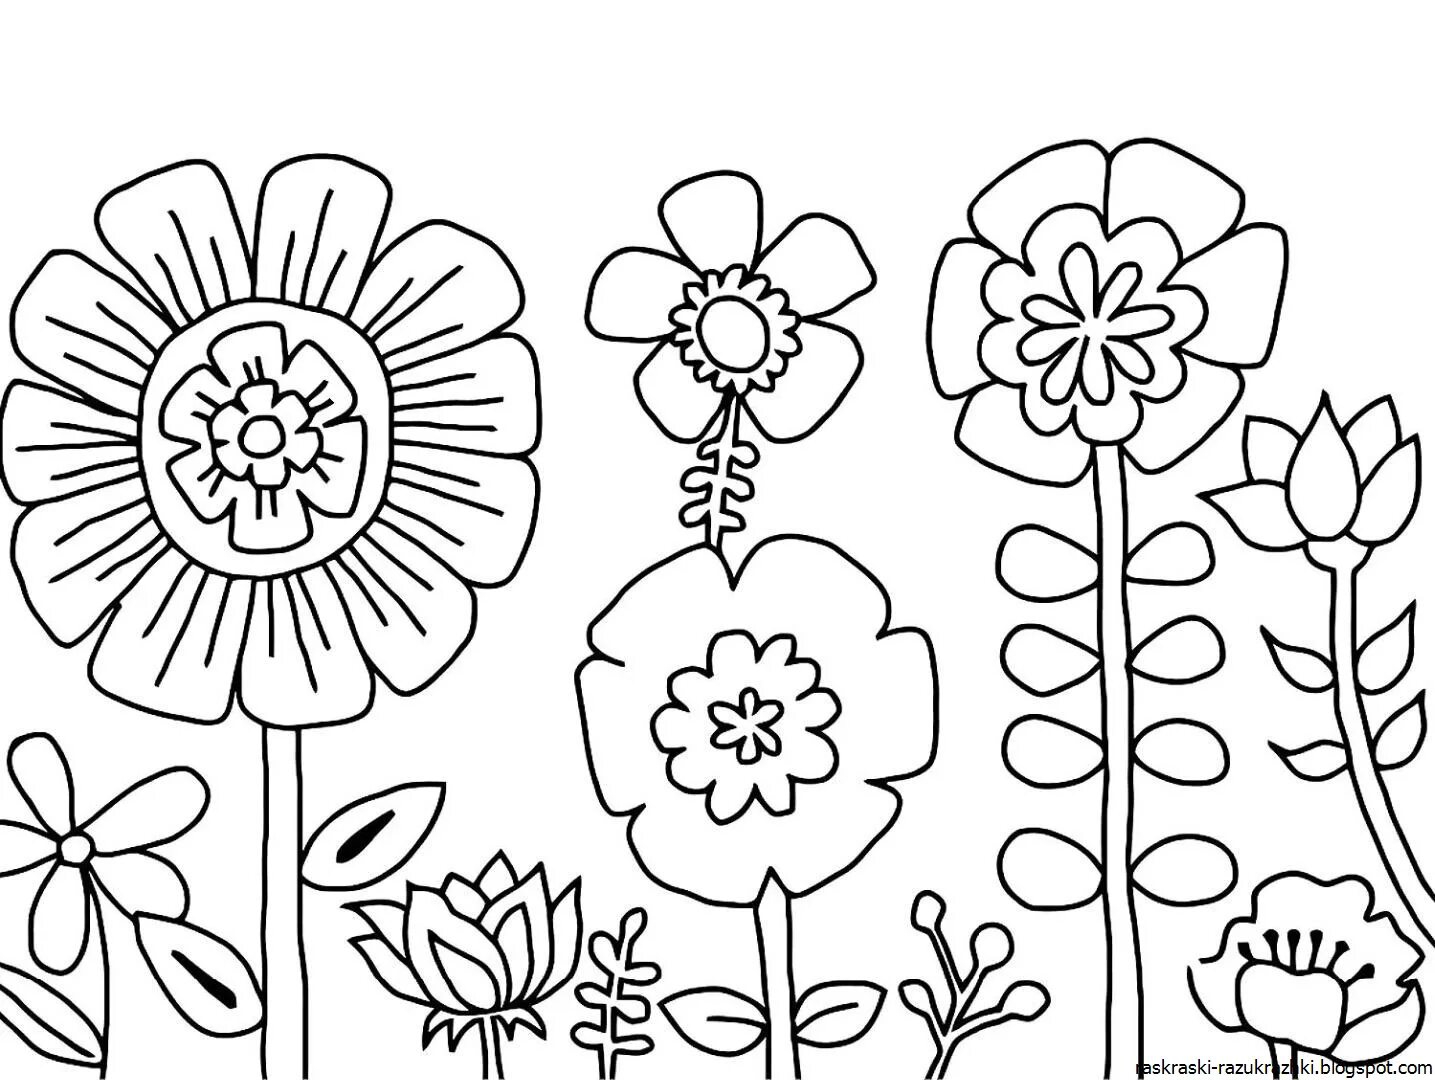 Soul coloring flower for children 5-6 years old